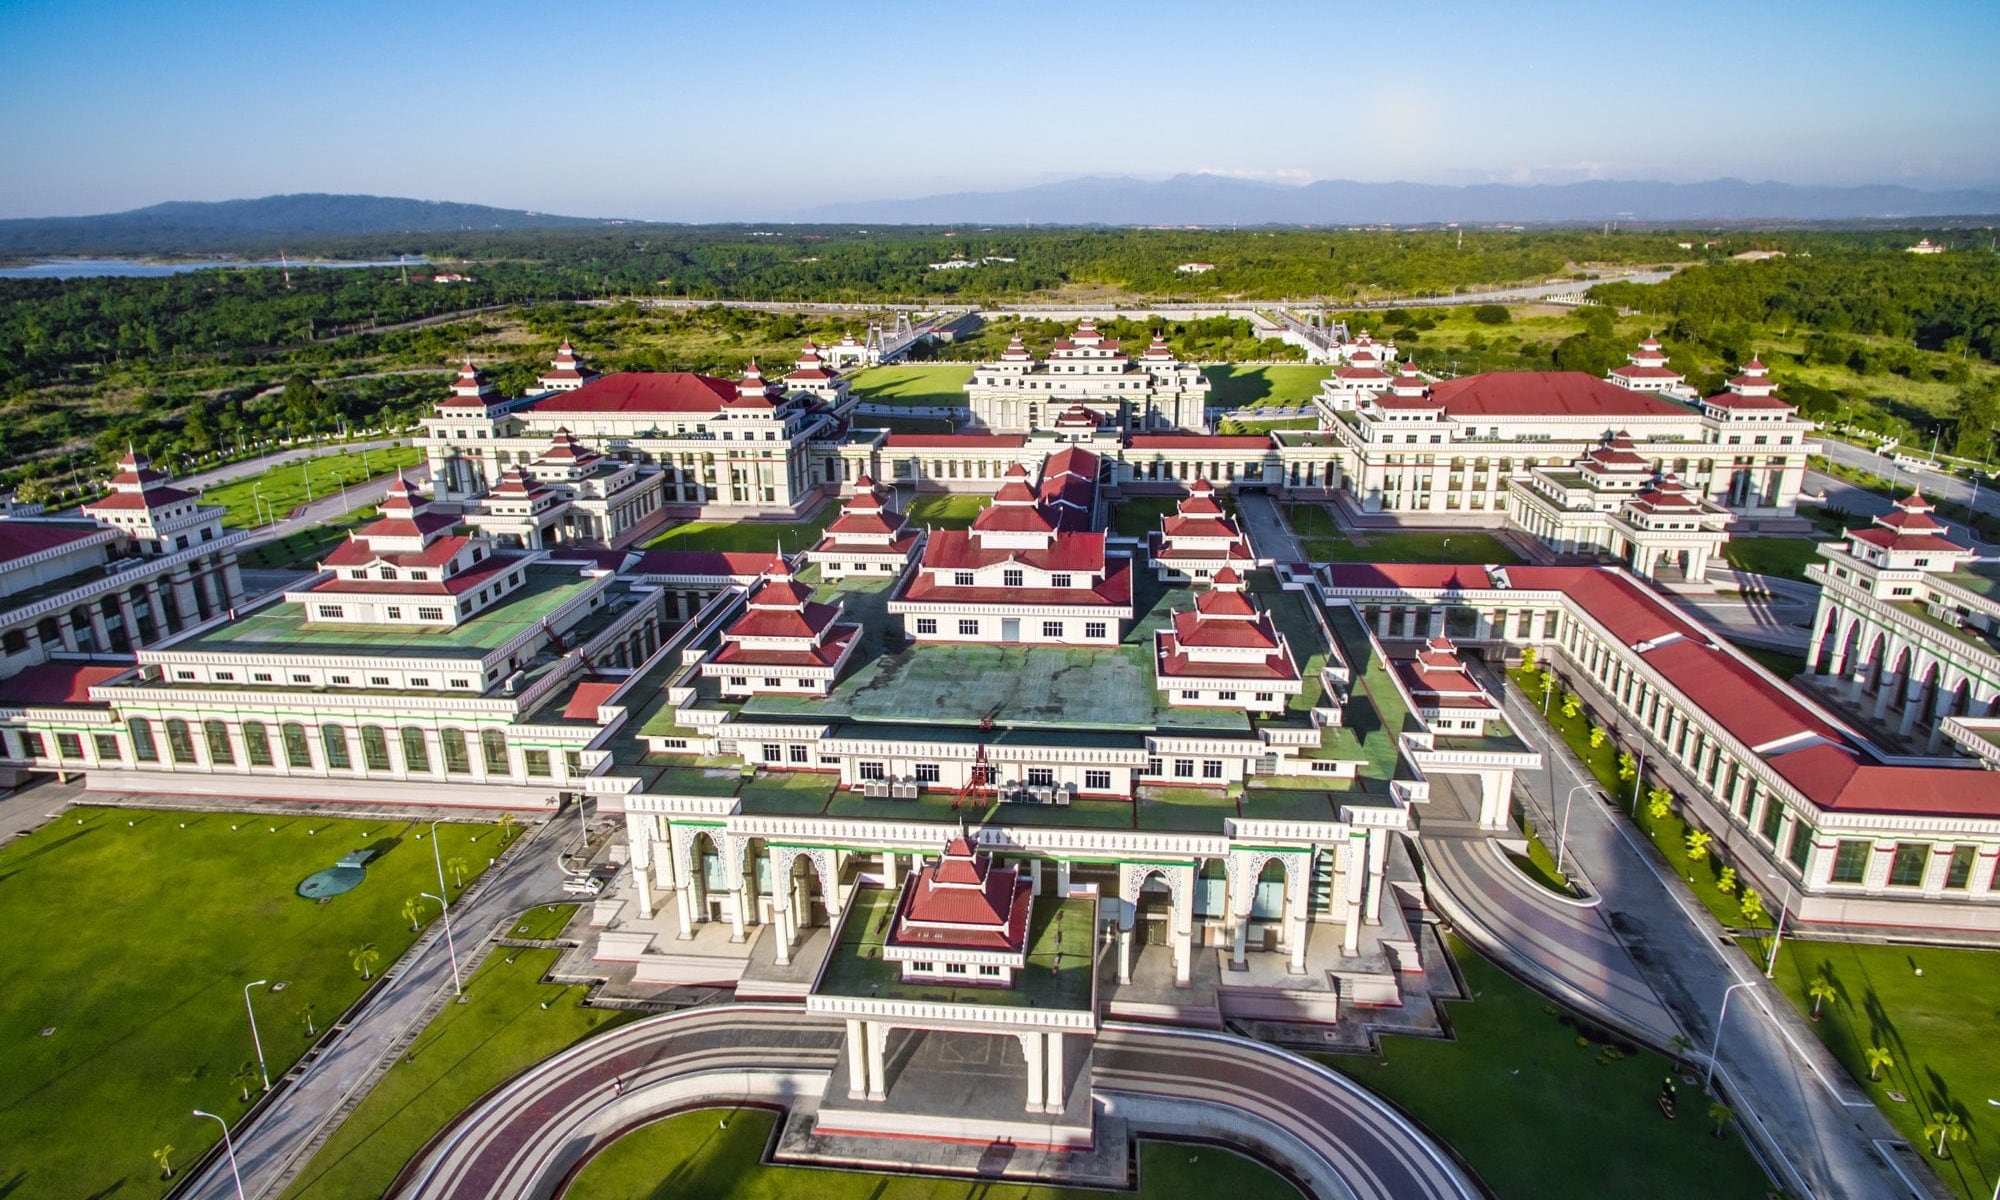 Myanmar’s parliament compound in Naypyidaw. Photo: Coconuts Yangon